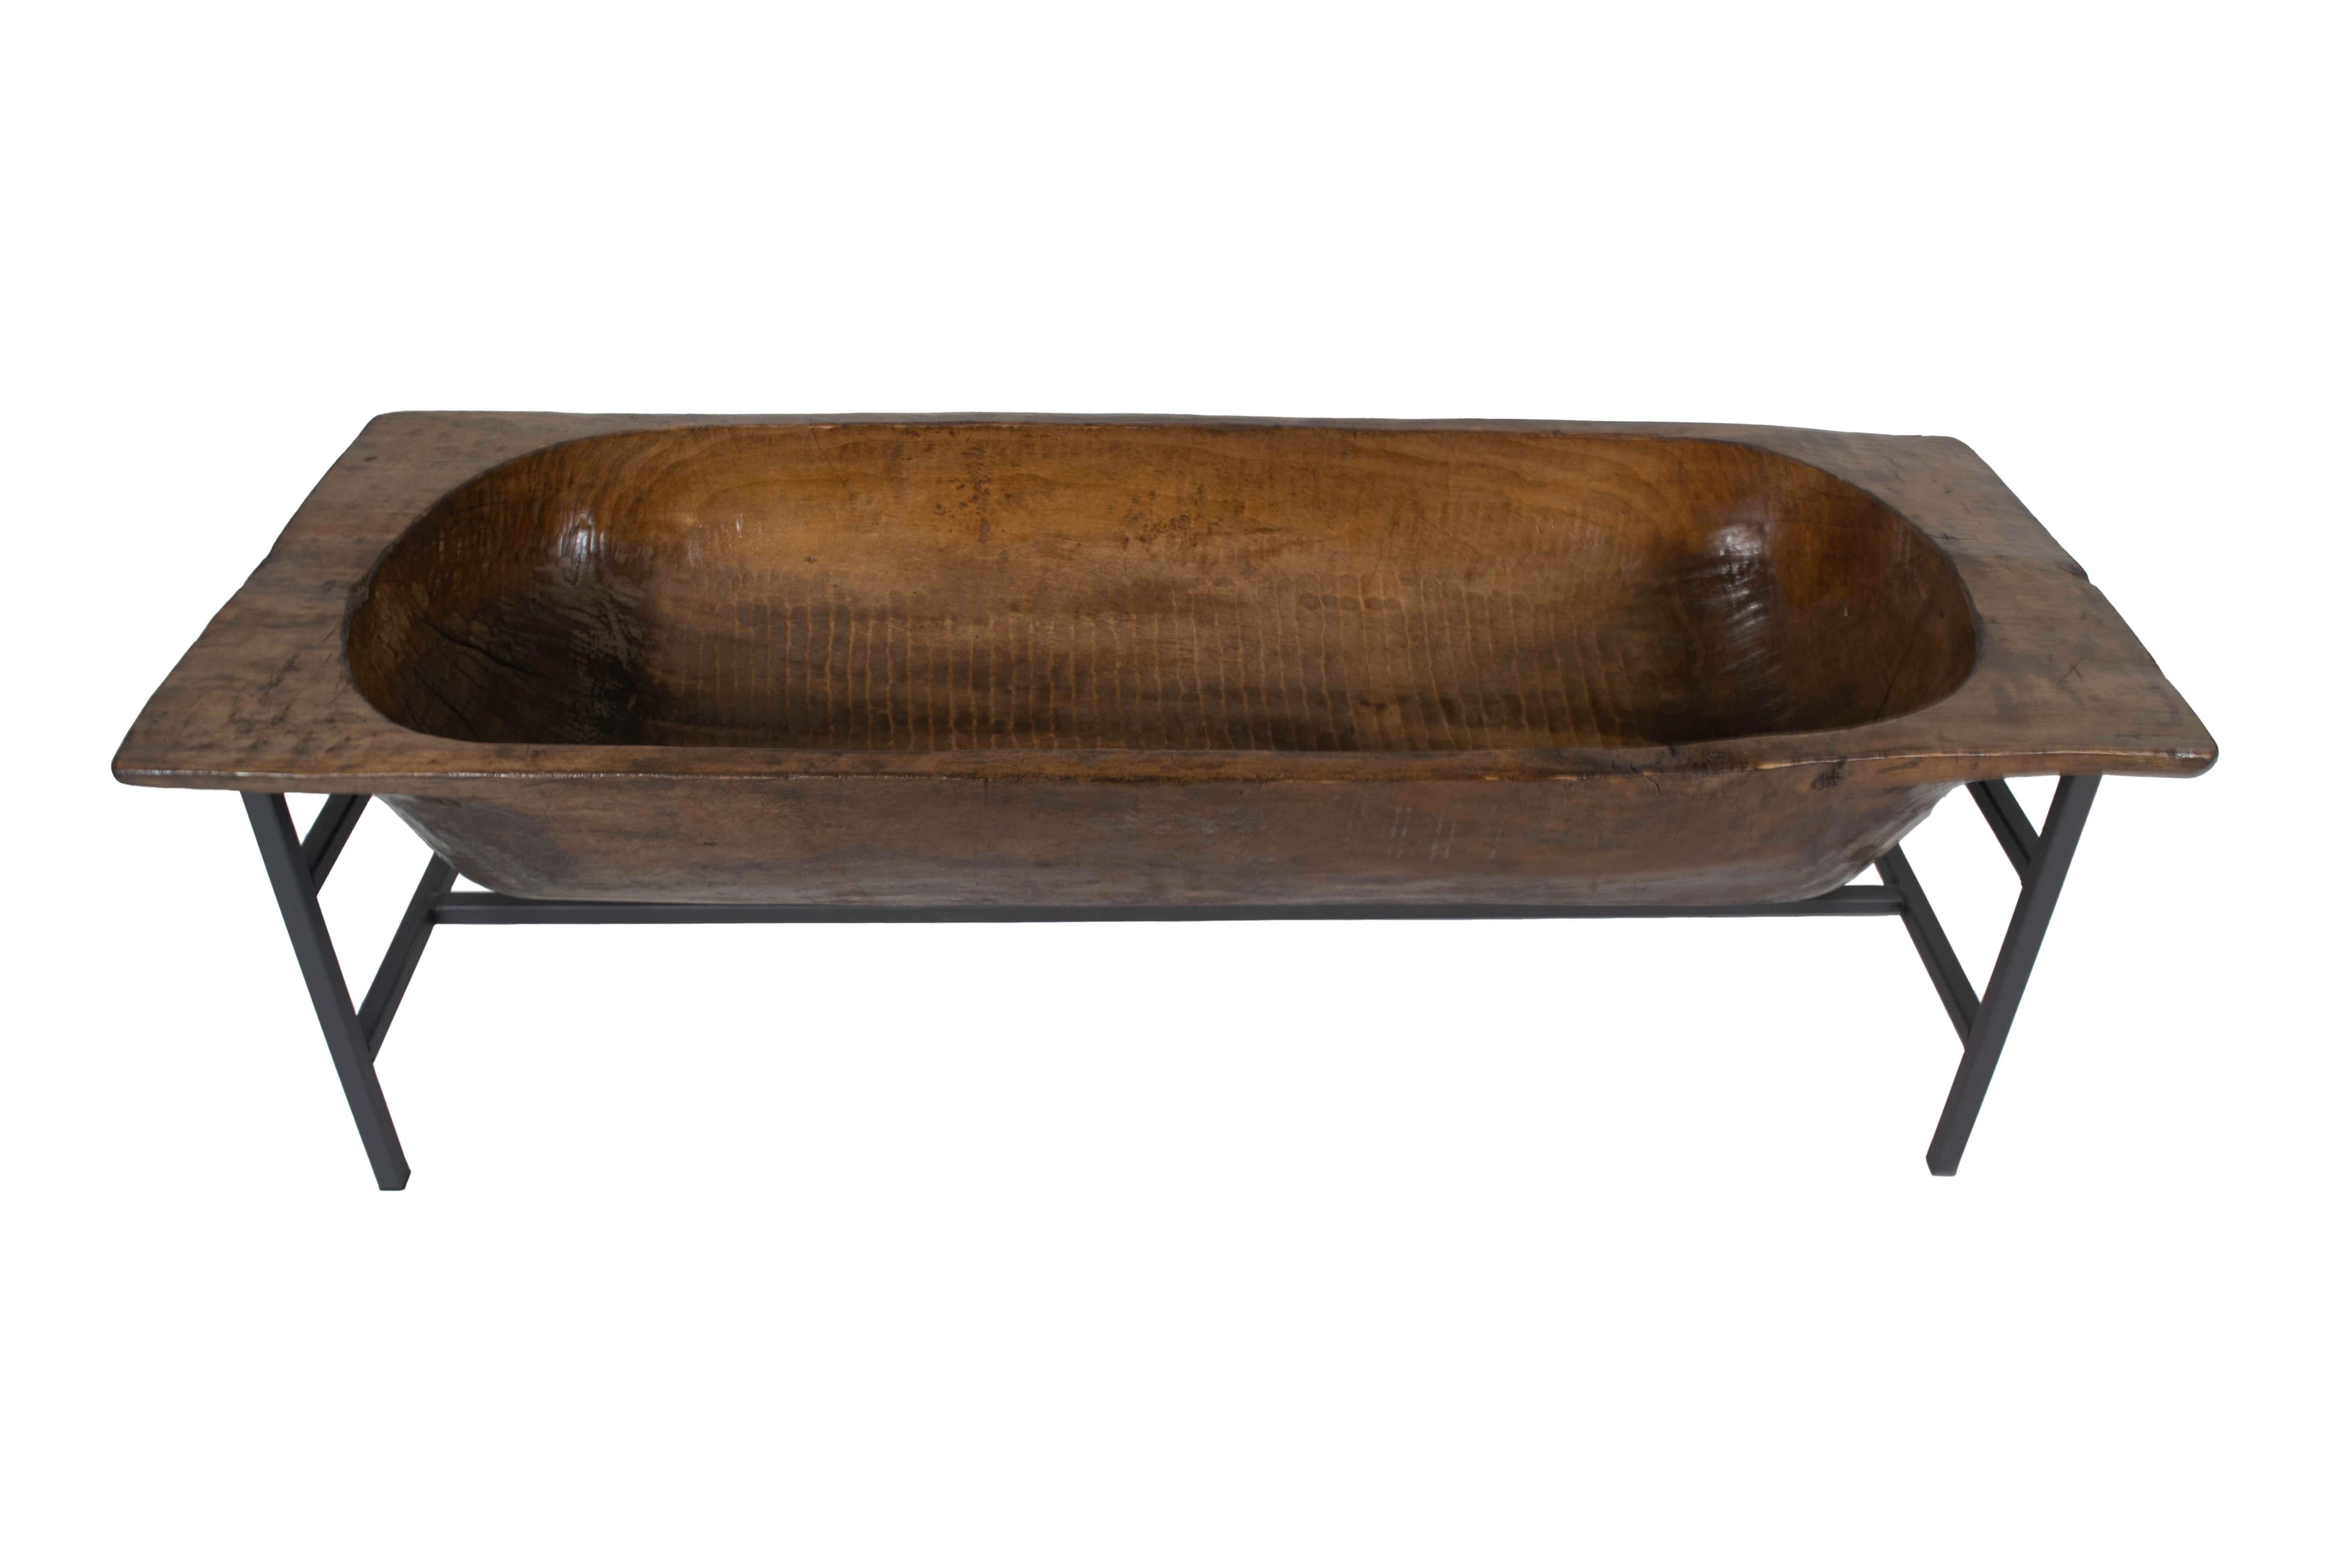 Brutalist Decorative Trough in Wood and Metal